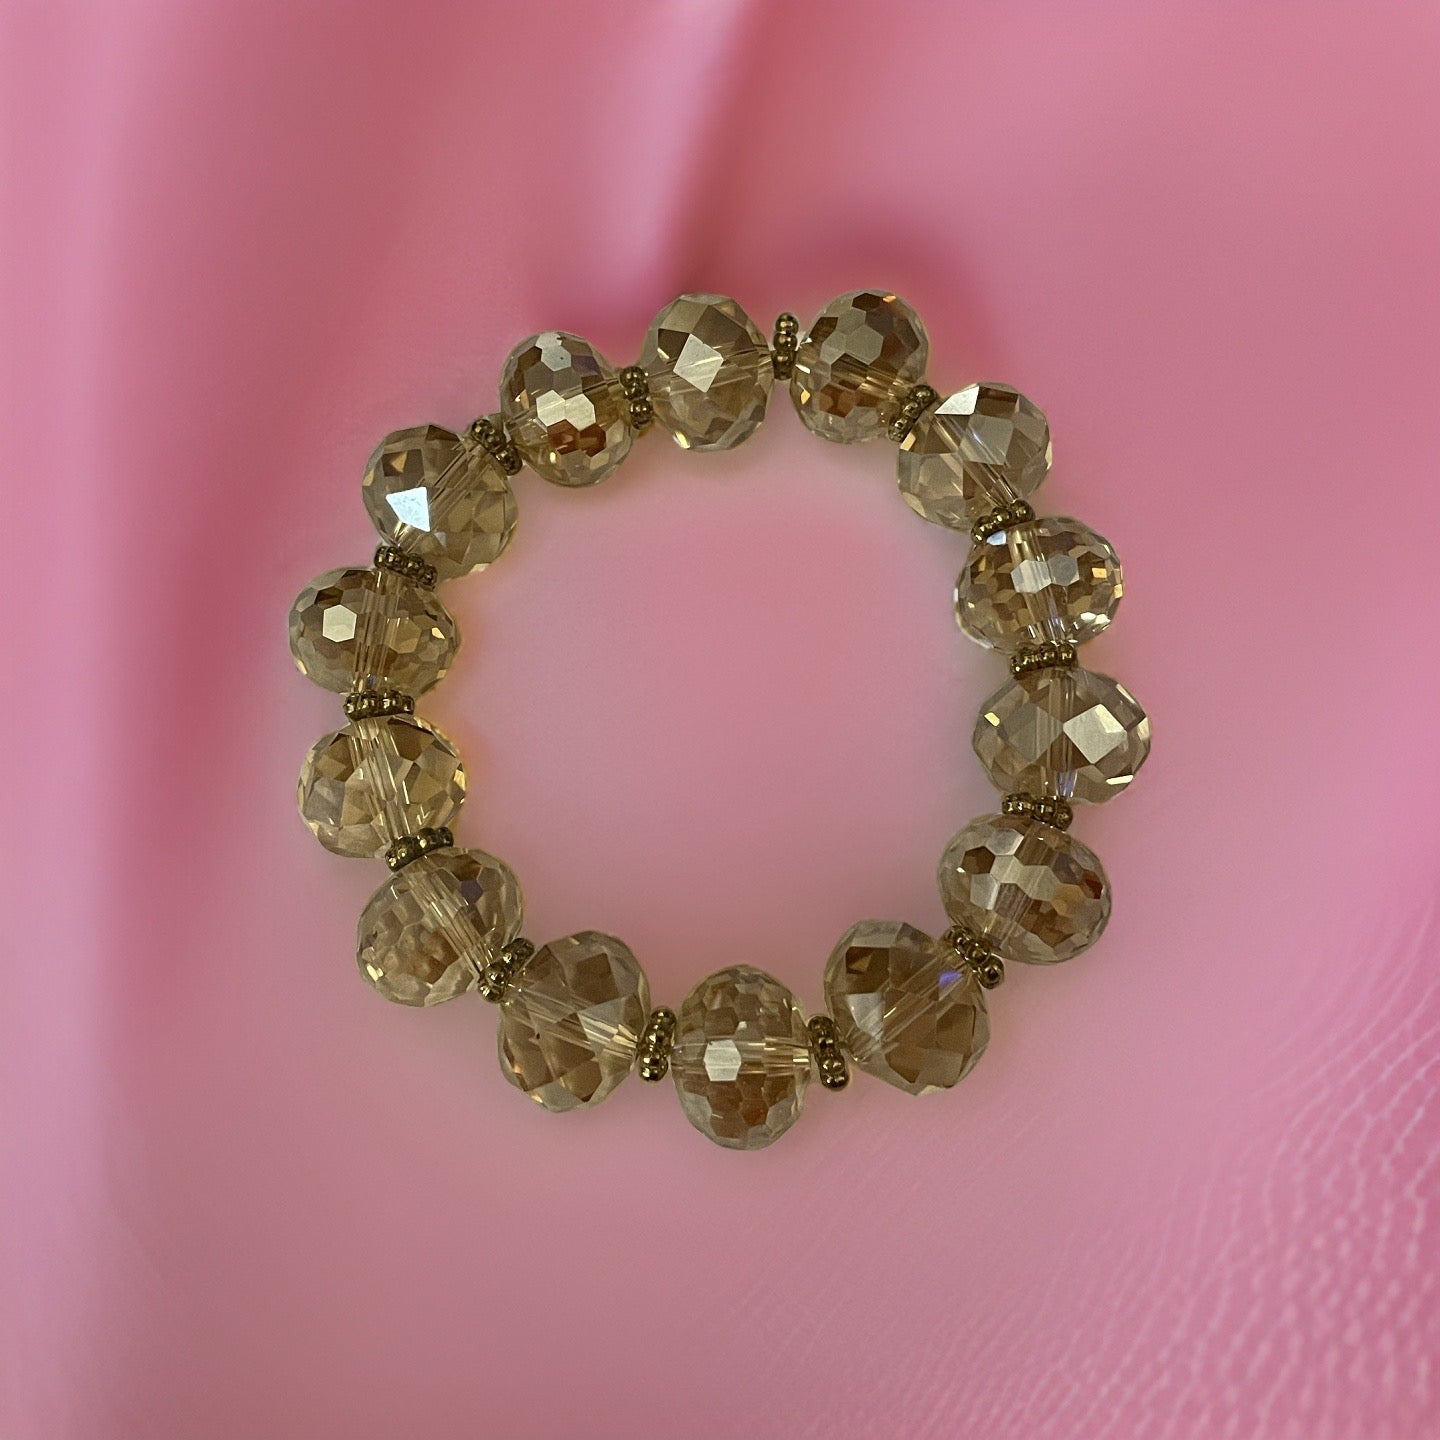 Sparkling Faceted Round Crystal Bead Stretch Bracelet - available in 3 colors